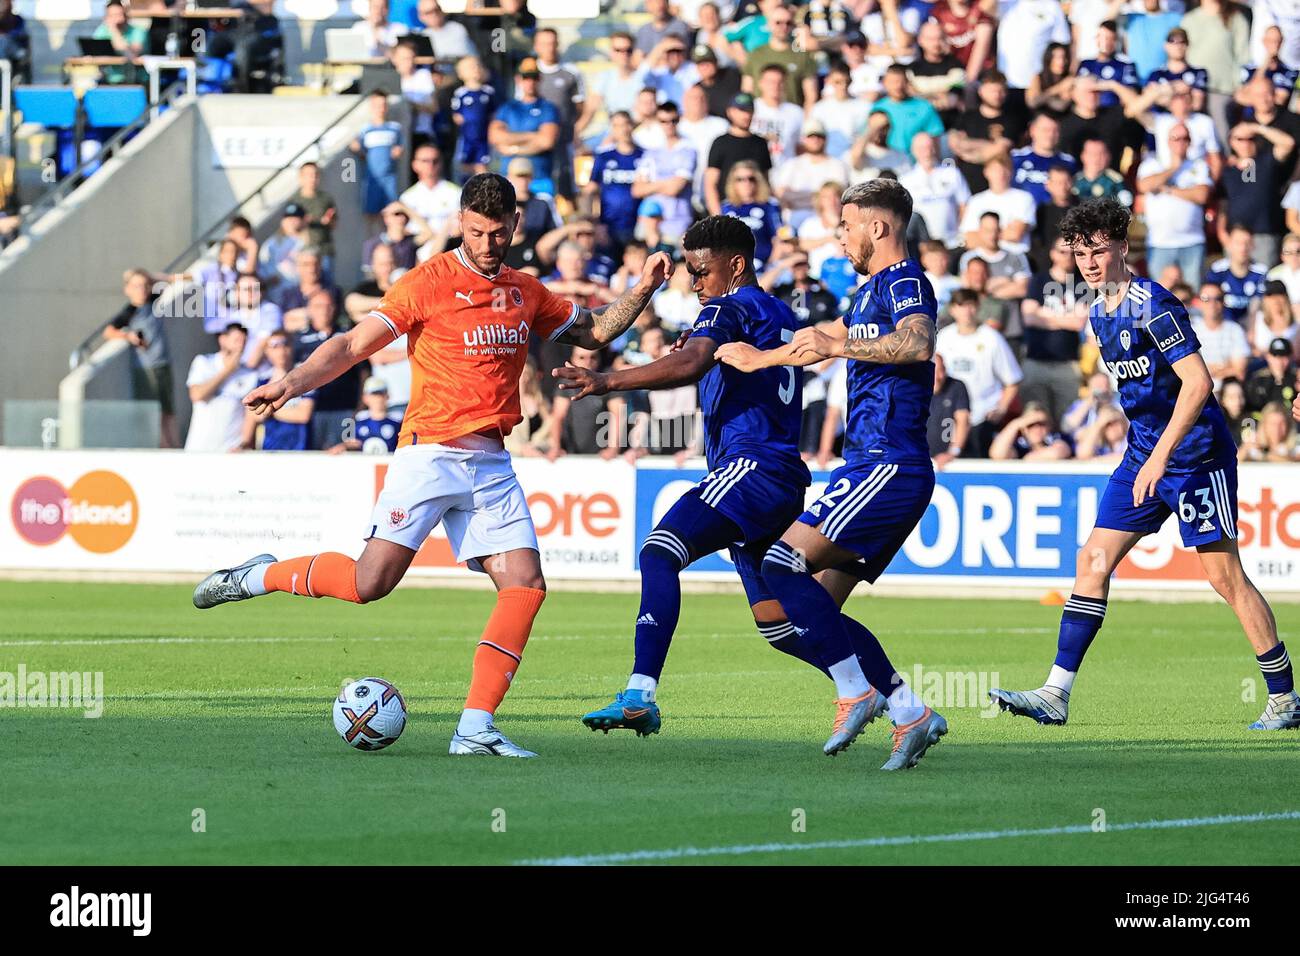 Gary Madine #14 of Blackpool shoots on goal, blocked by Junior Firpo #3 of Leeds United Stock Photo